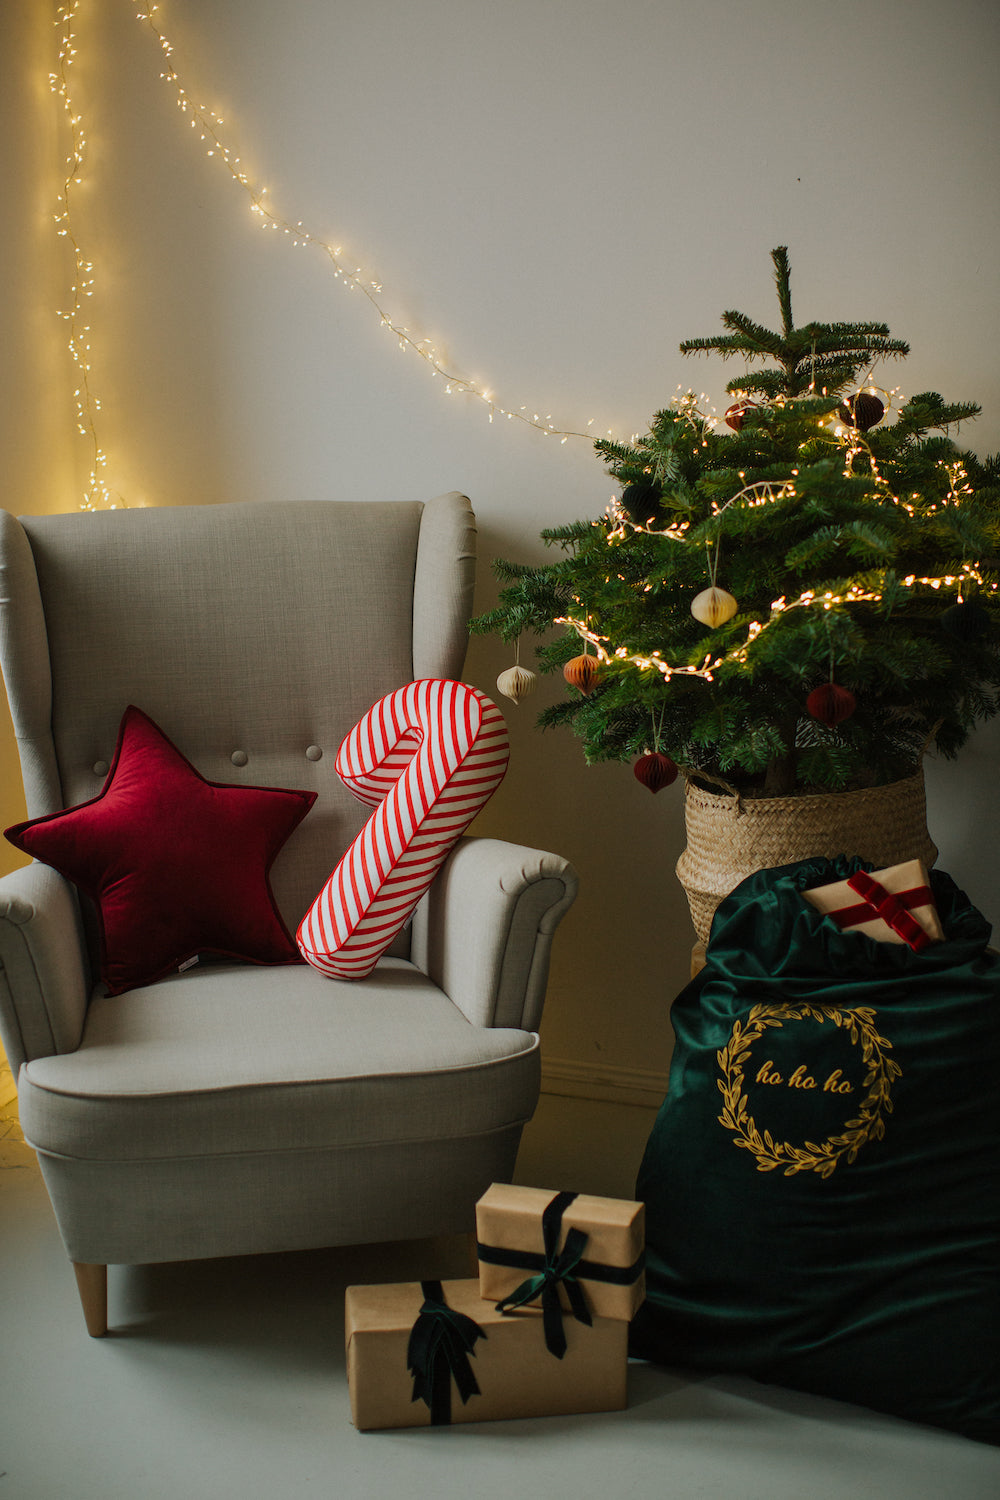 christmas sack for gifts standing next to christmas tree and armchair with candy cane cushion